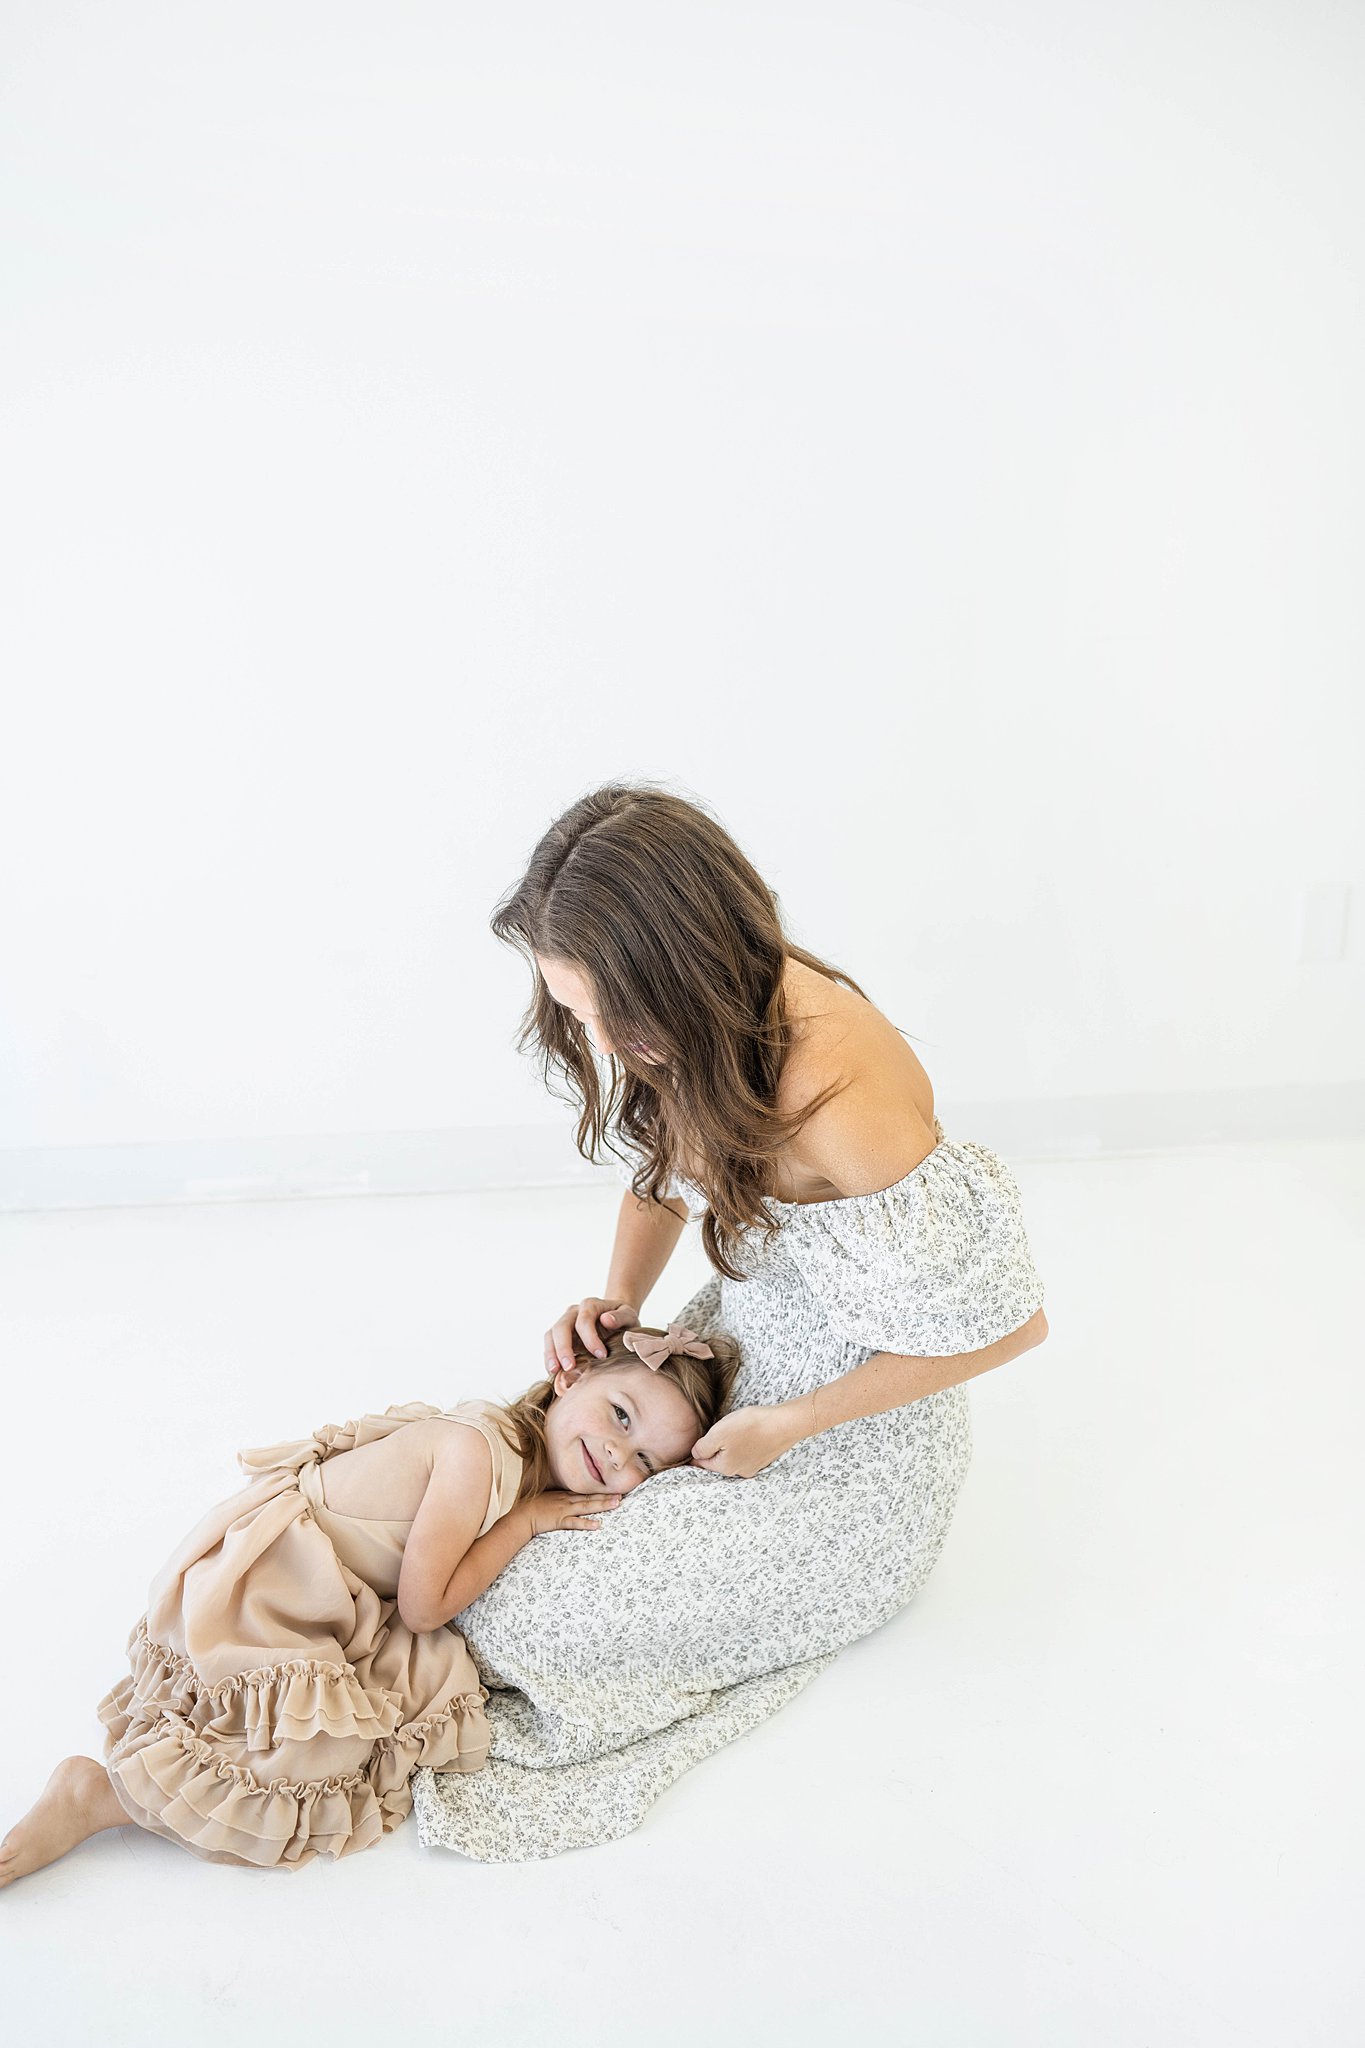 A young girl lays her head in the lap of her mother while sitting the the floor of a studio